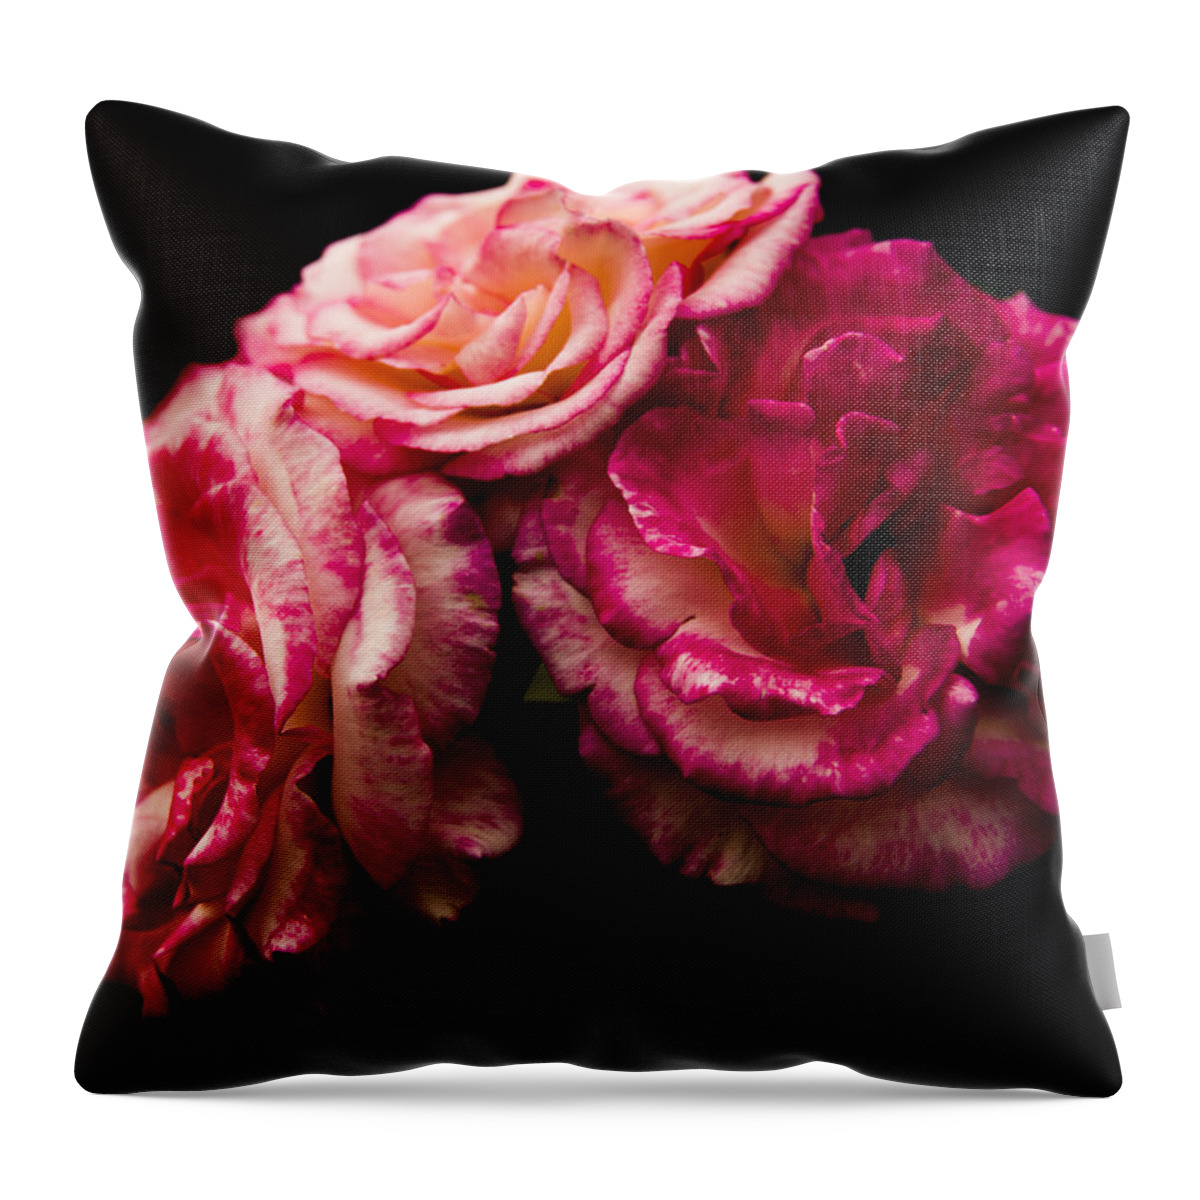 Flowers Throw Pillow featuring the photograph Pink Solitude by Theodore Jones